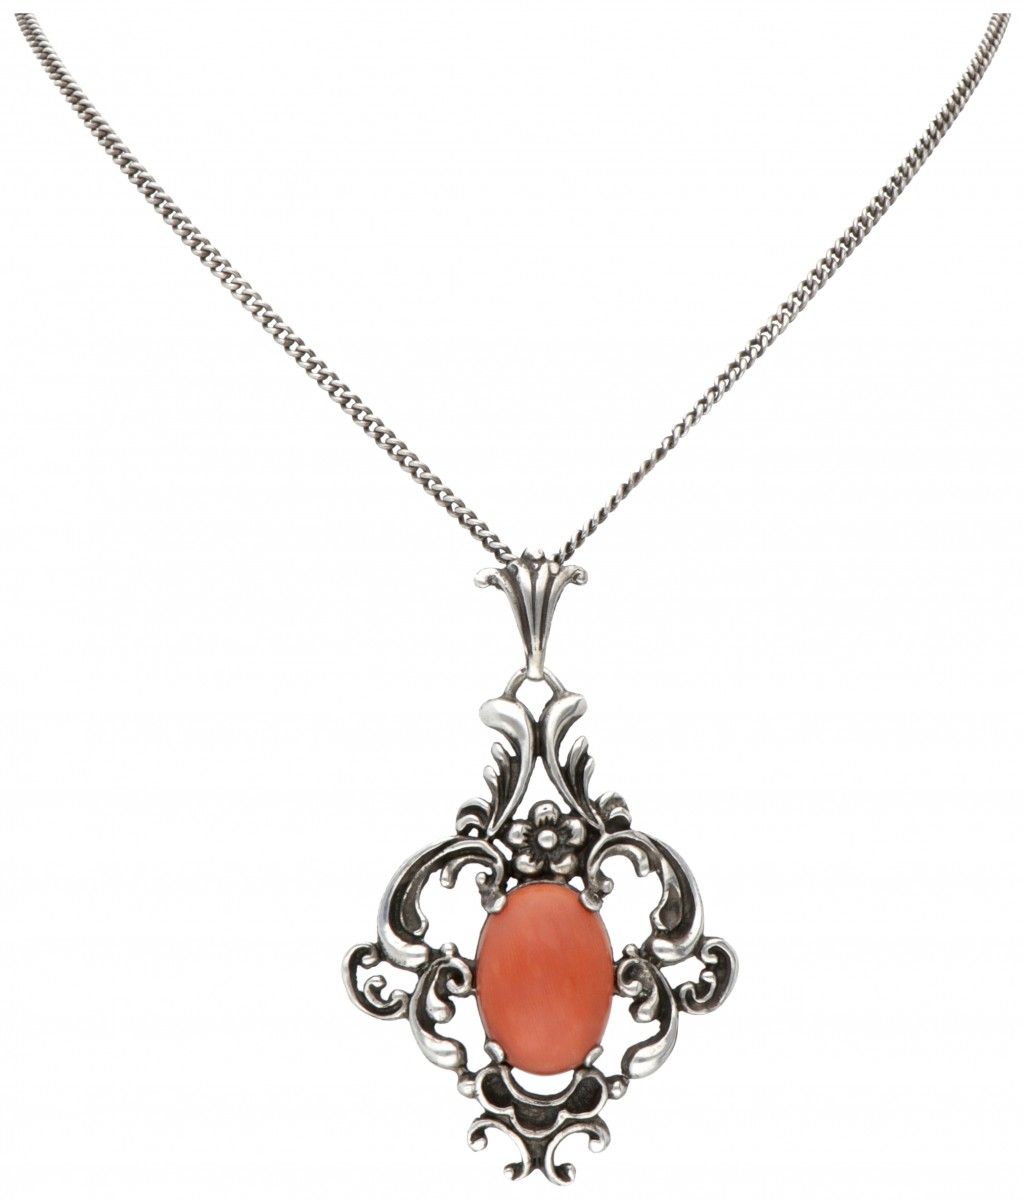 Silver necklace with pendant set with approx. 7.29 ct. Red coral - 835/1000. Hal&hellip;